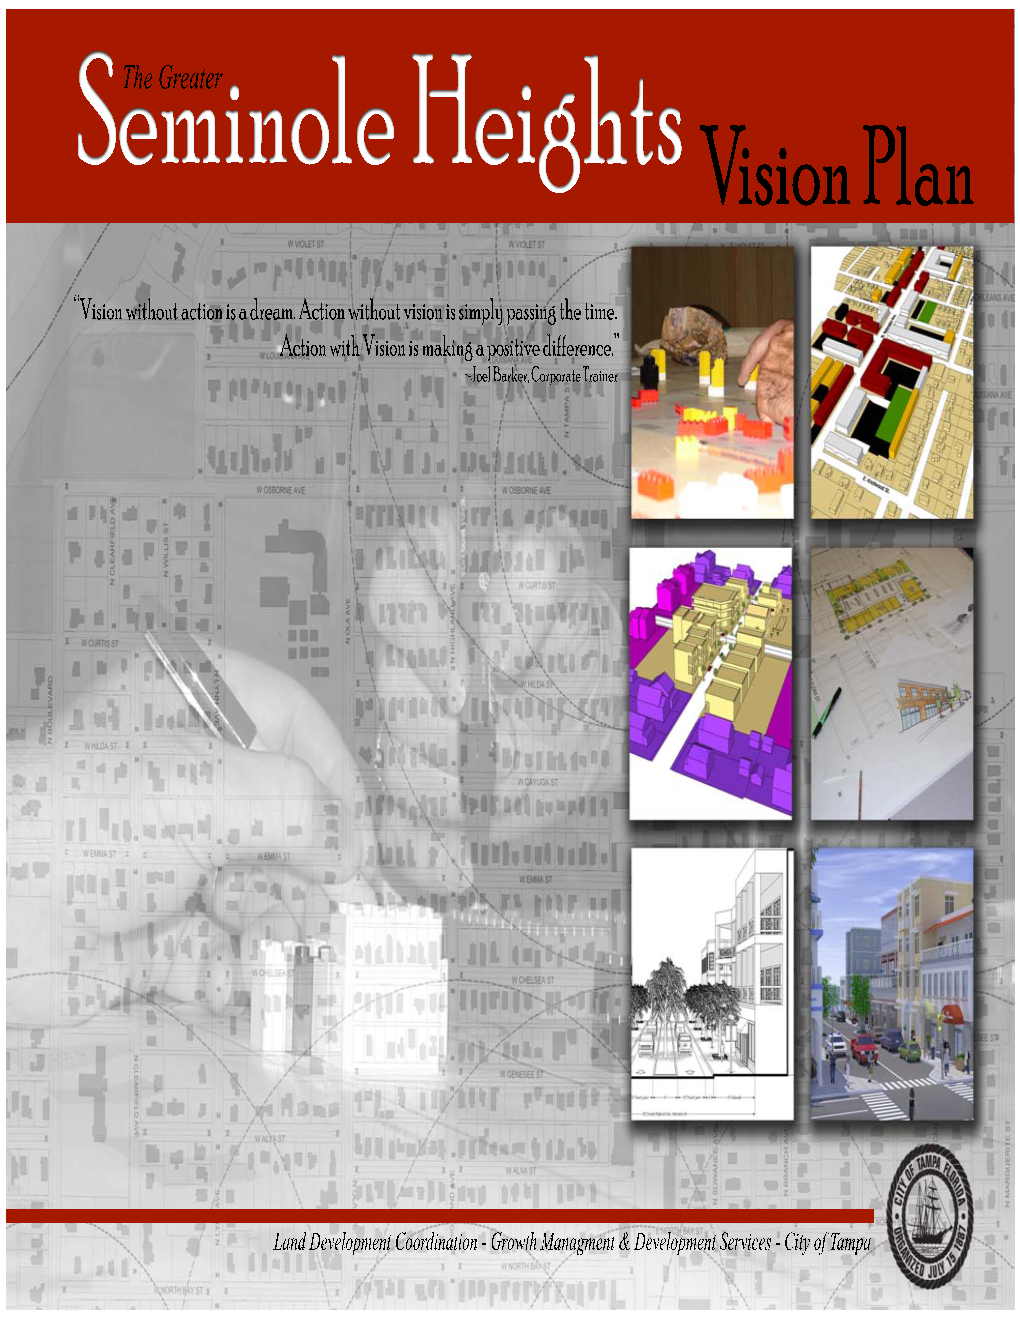 The Greater Seminole Heights Vision Plan